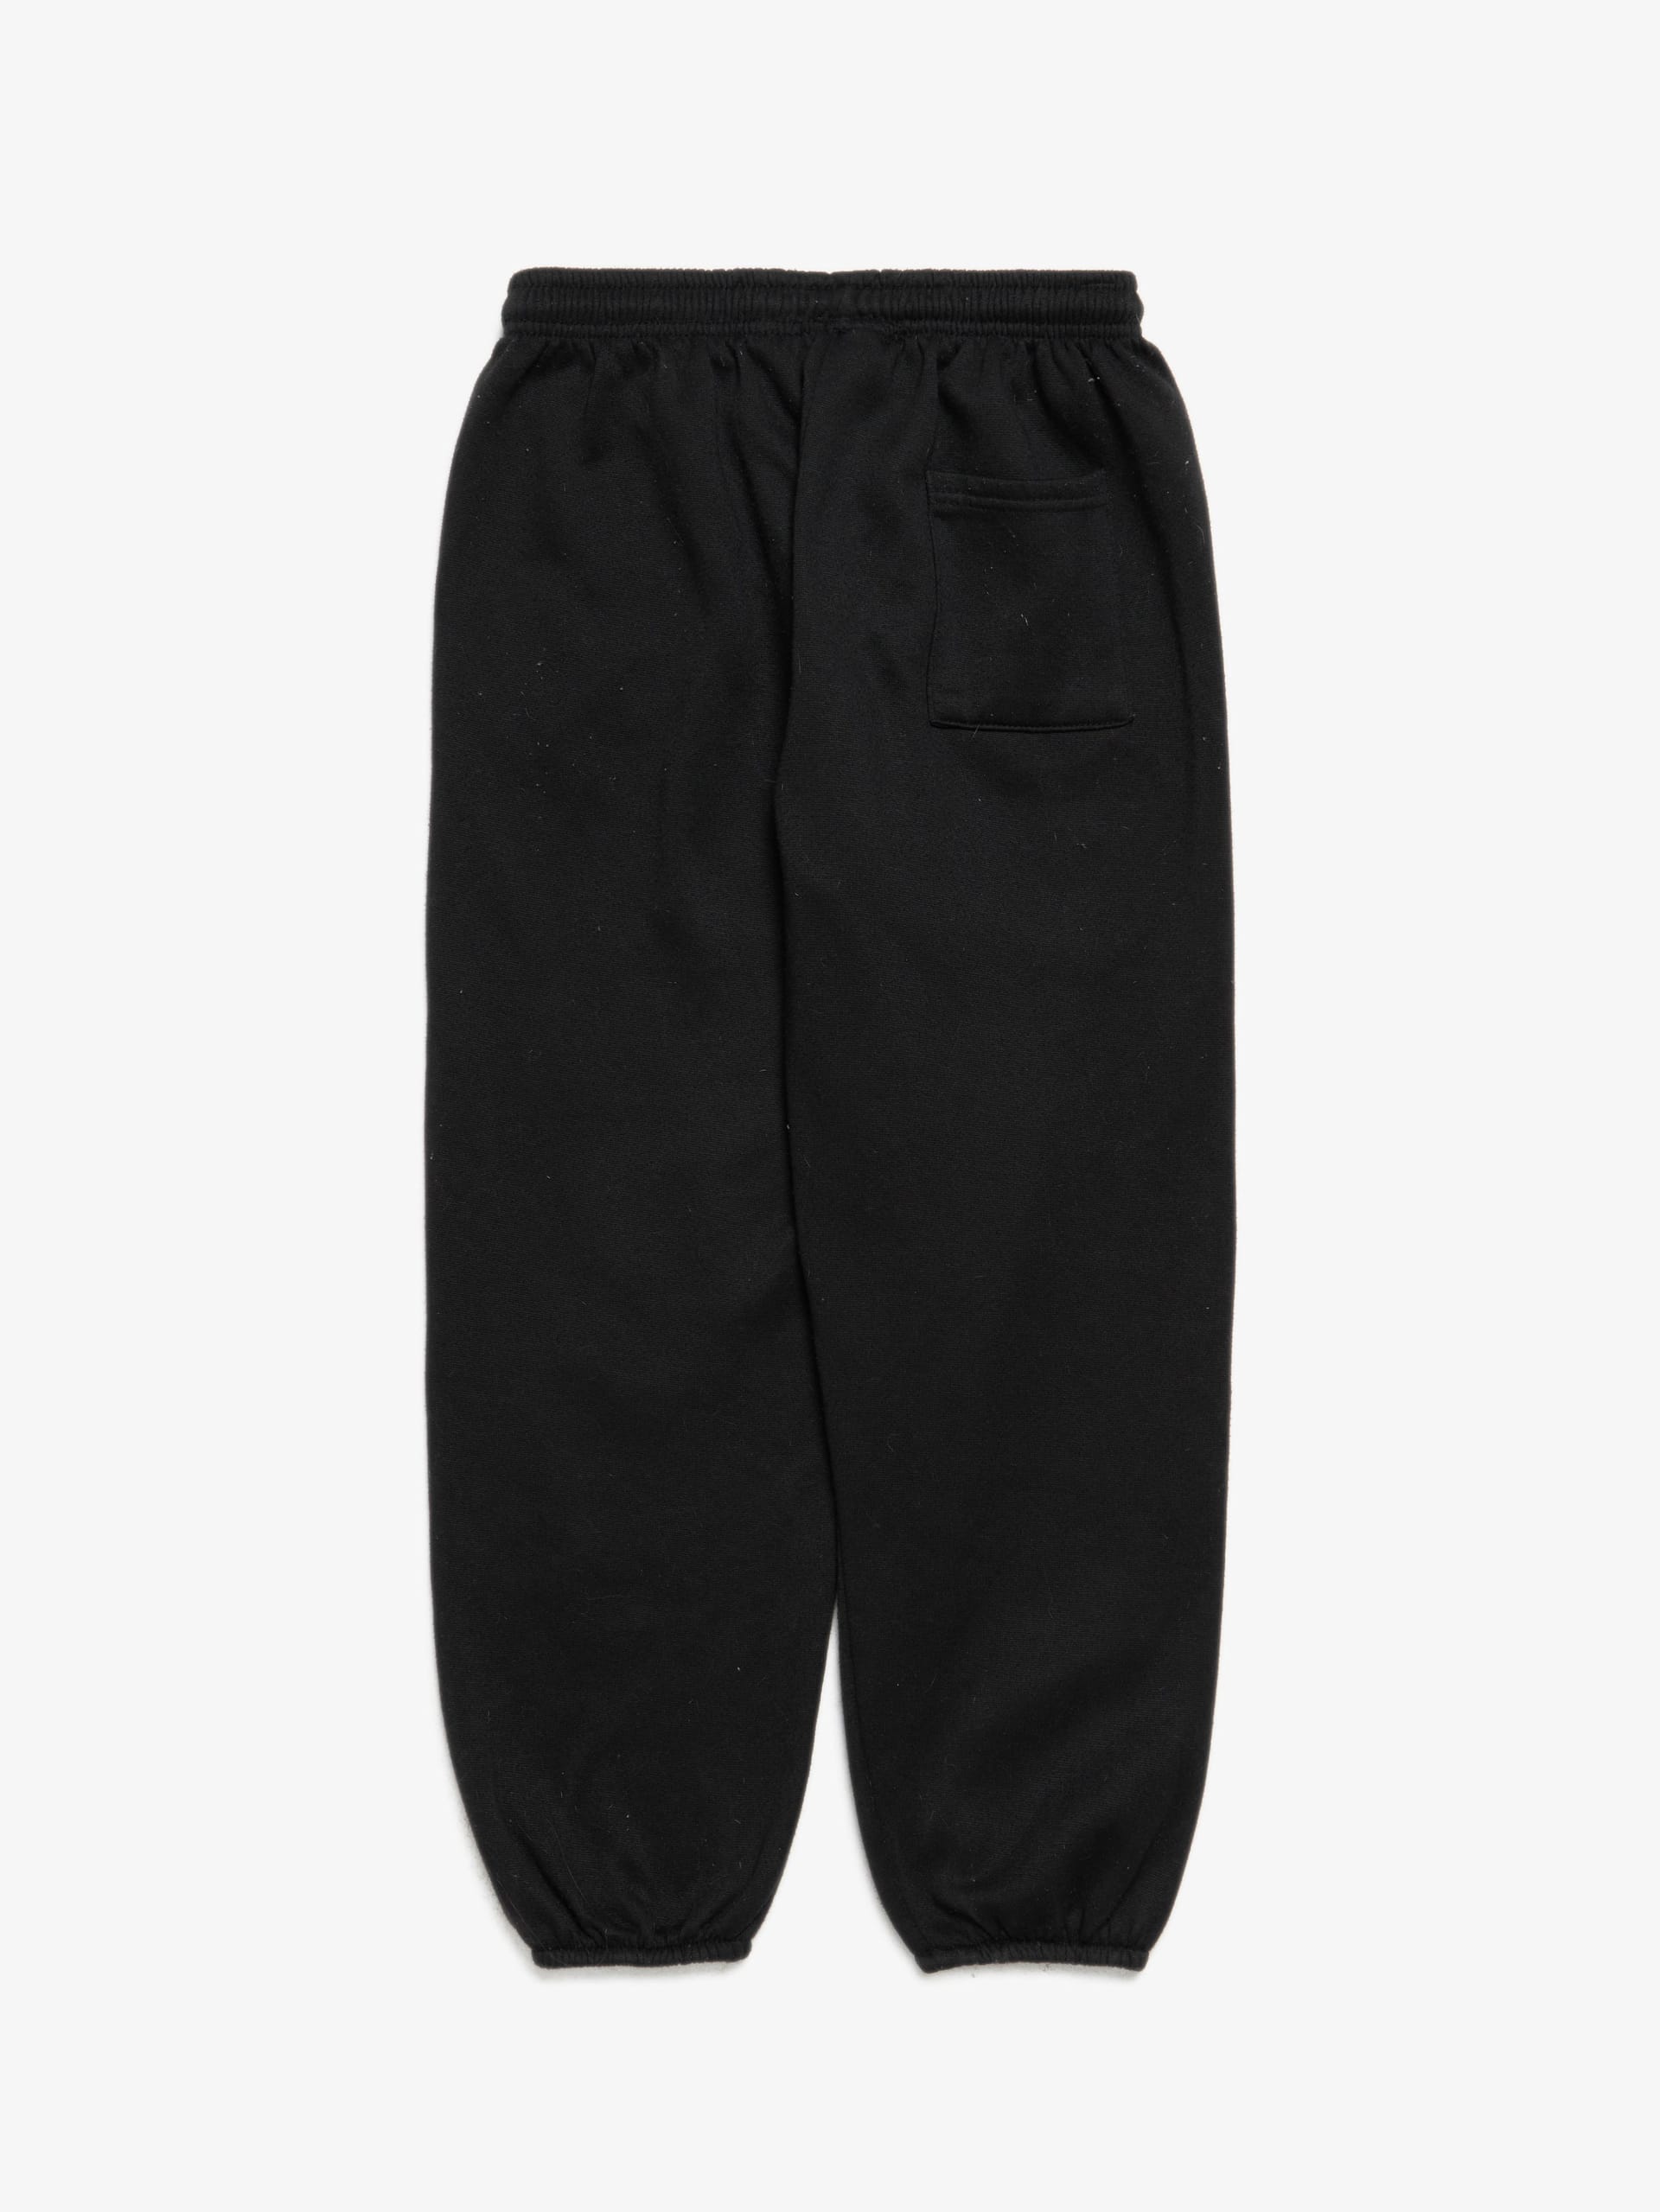 Blackfist Black Suck Days Printed Cotton and Polyester Sweatpants